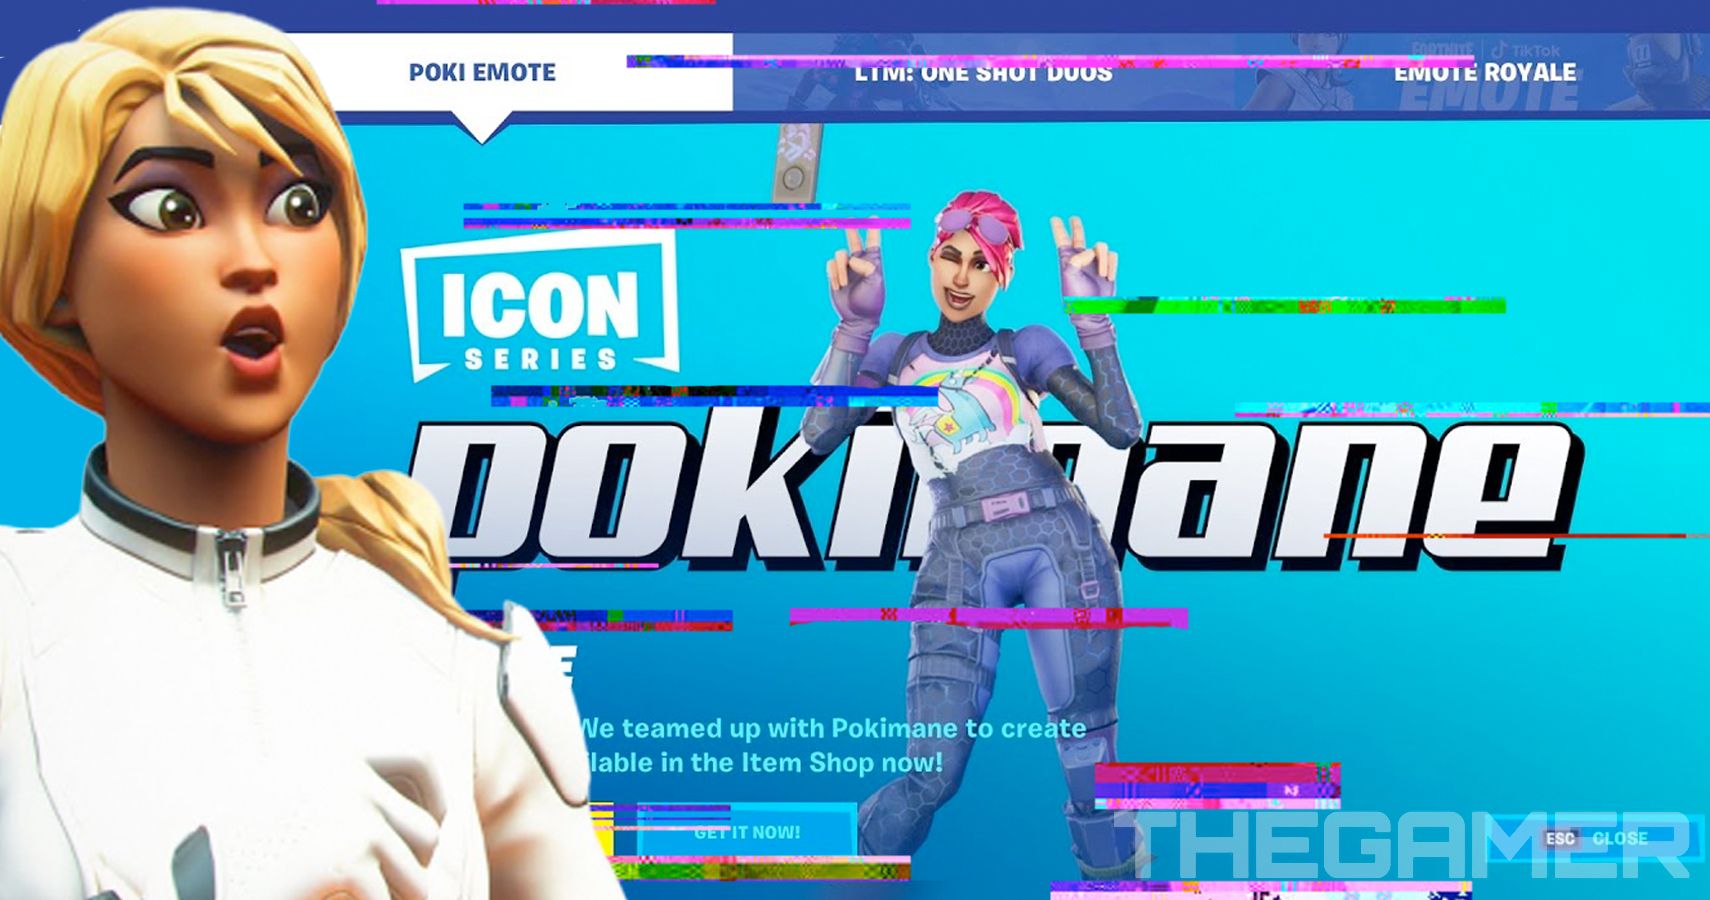 The Poki emote deforms most if not all skin's chests, at least you